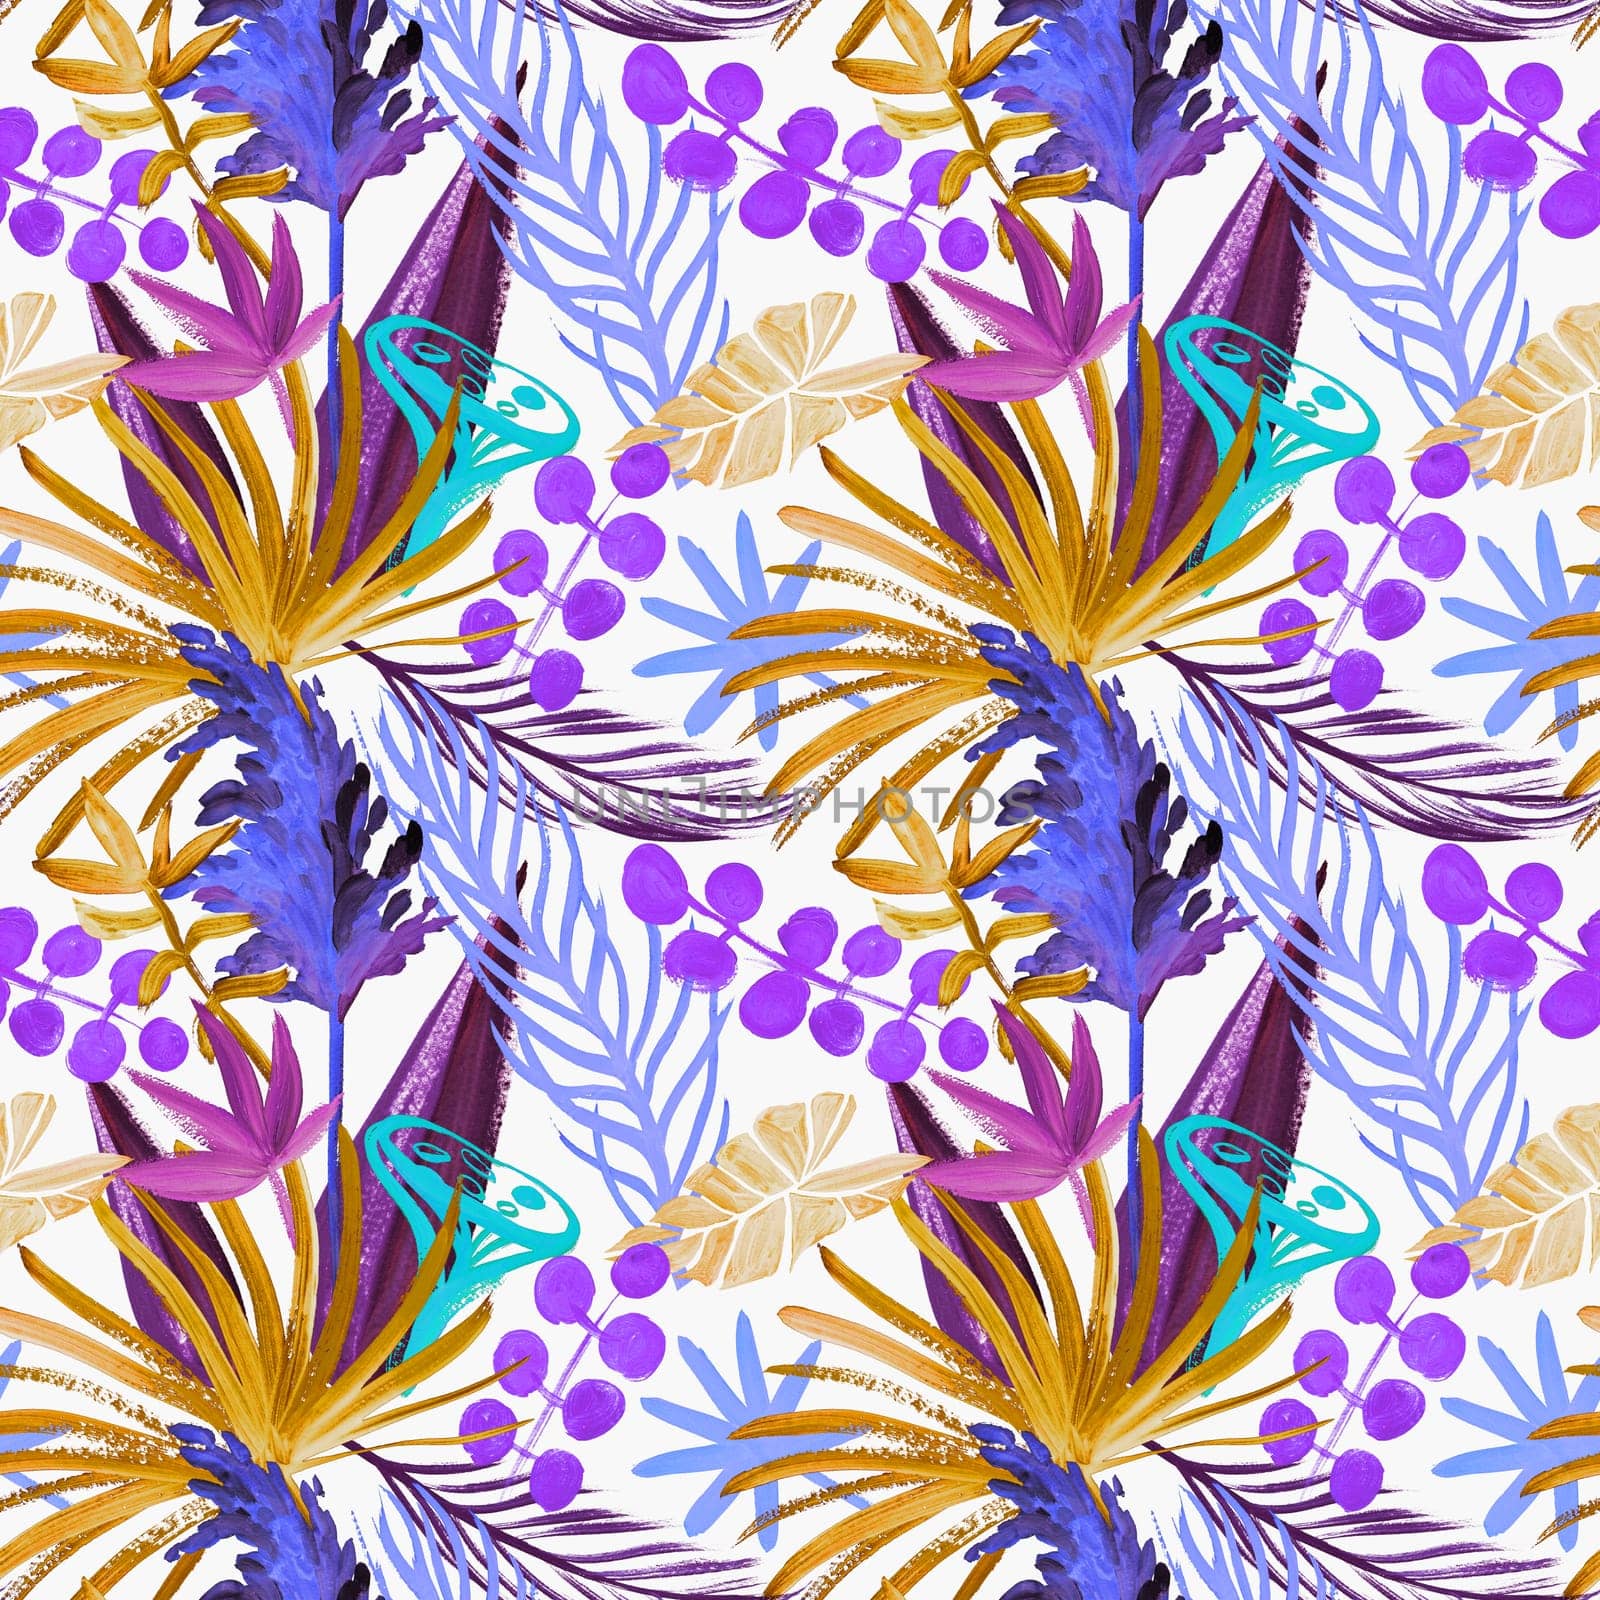 modern bright seamless pattern with tropical palm leaves and colorful dried flowers for fashion textiles and surface design. Summer botanical motif in futuristic colors